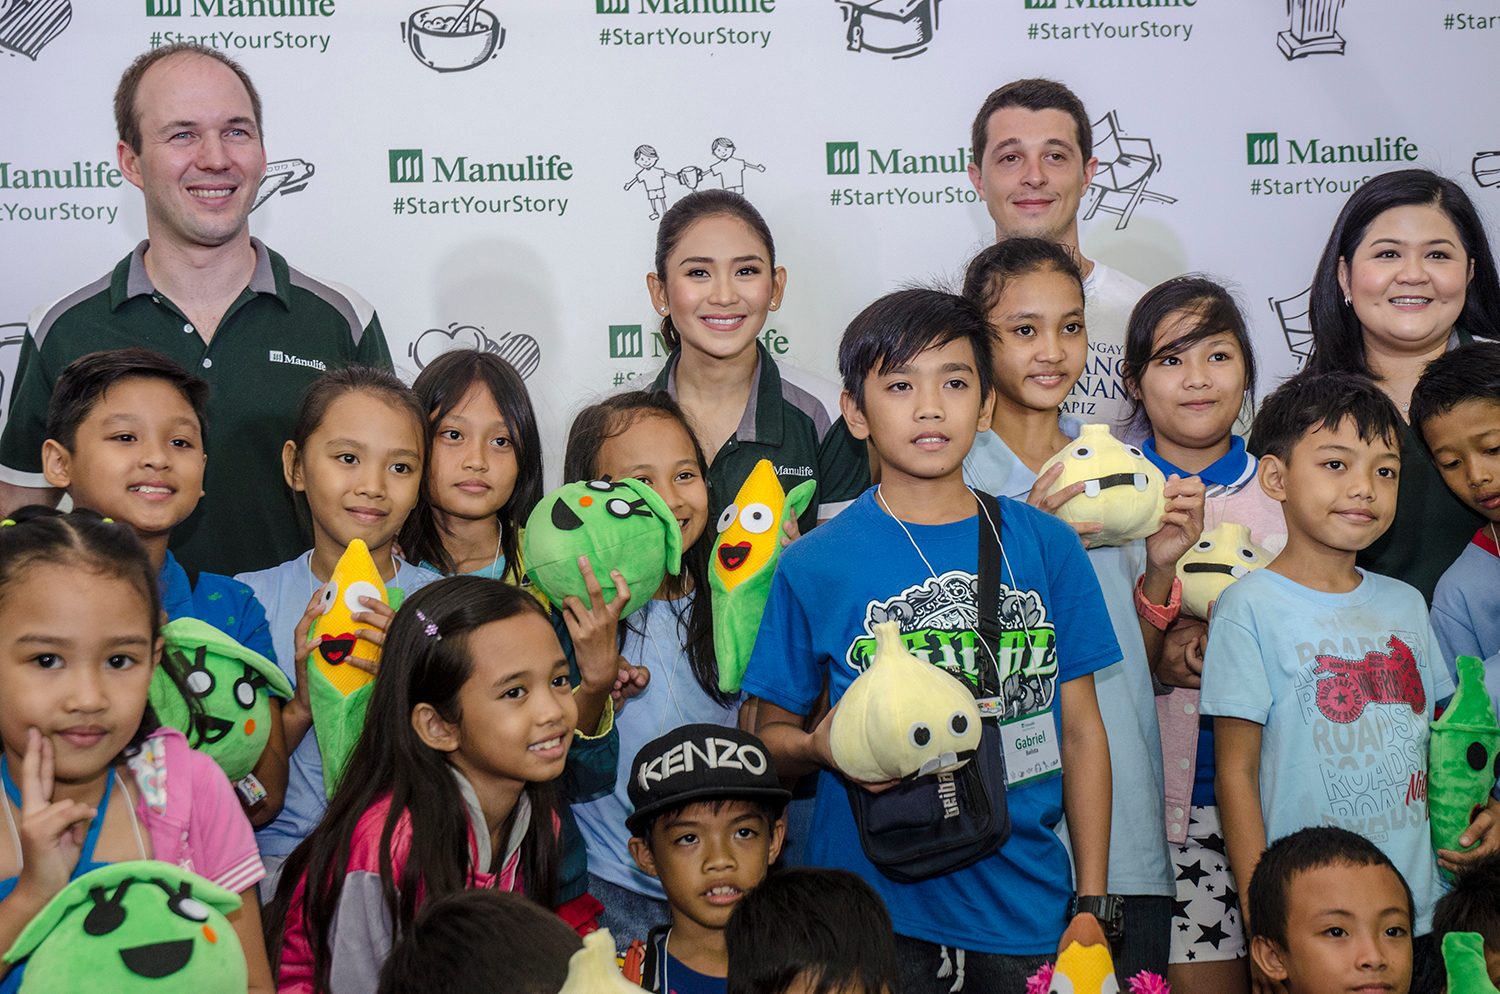 Sarah with the Manulife staff and kids from Gawad Kalinga during the charity event at the Museo Pambata. Photo by Rob Reyes/Rappler  